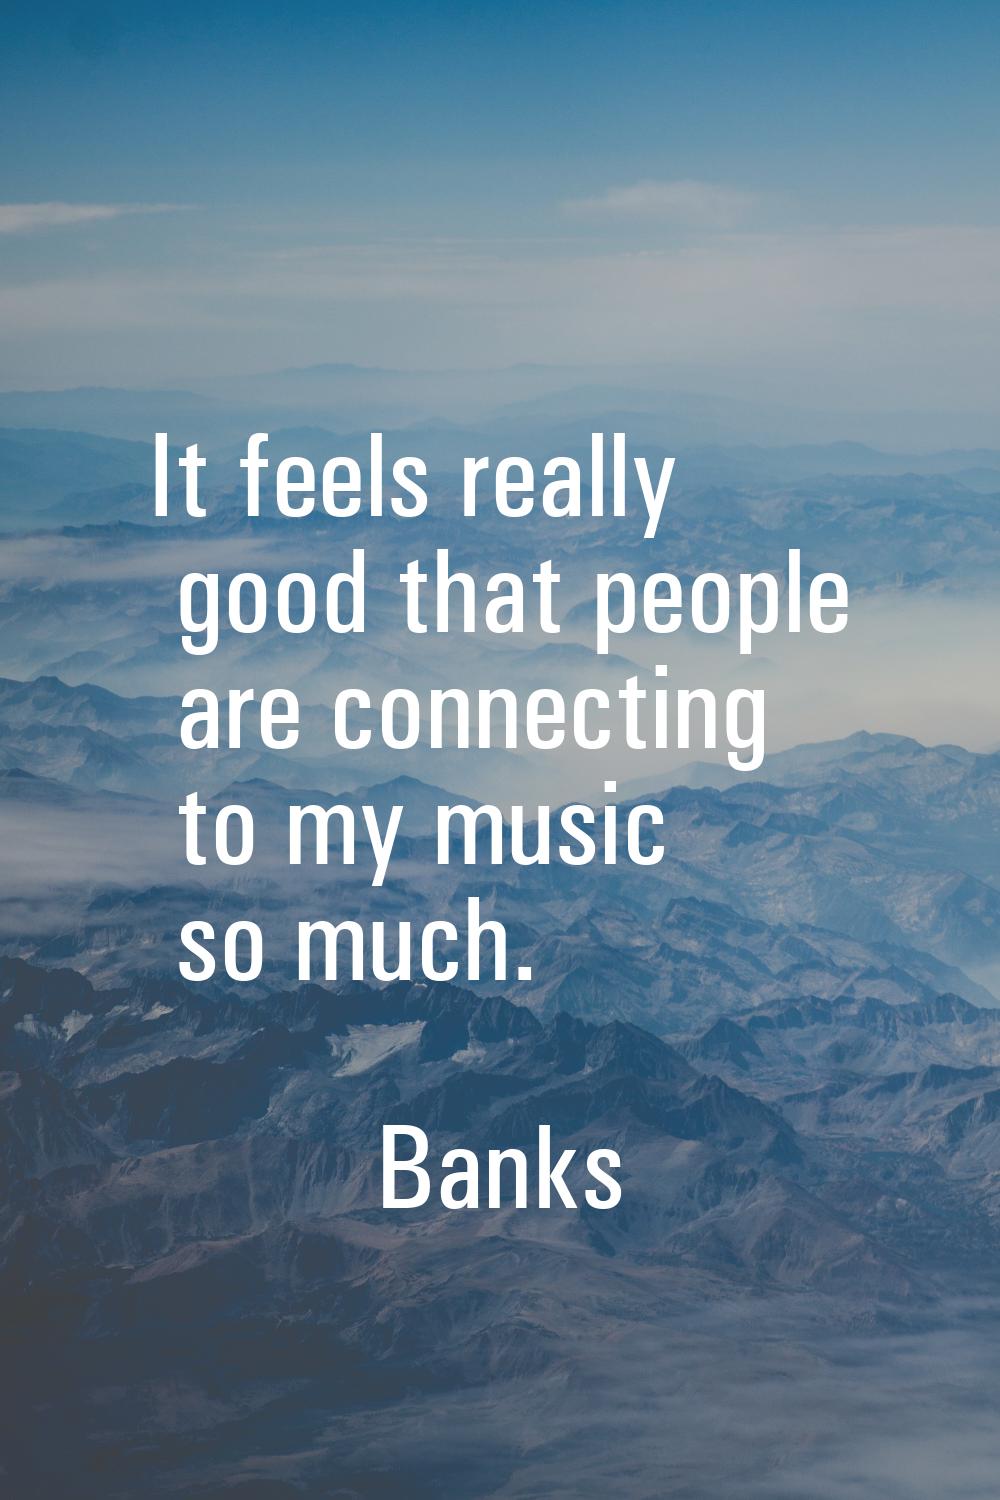 It feels really good that people are connecting to my music so much.